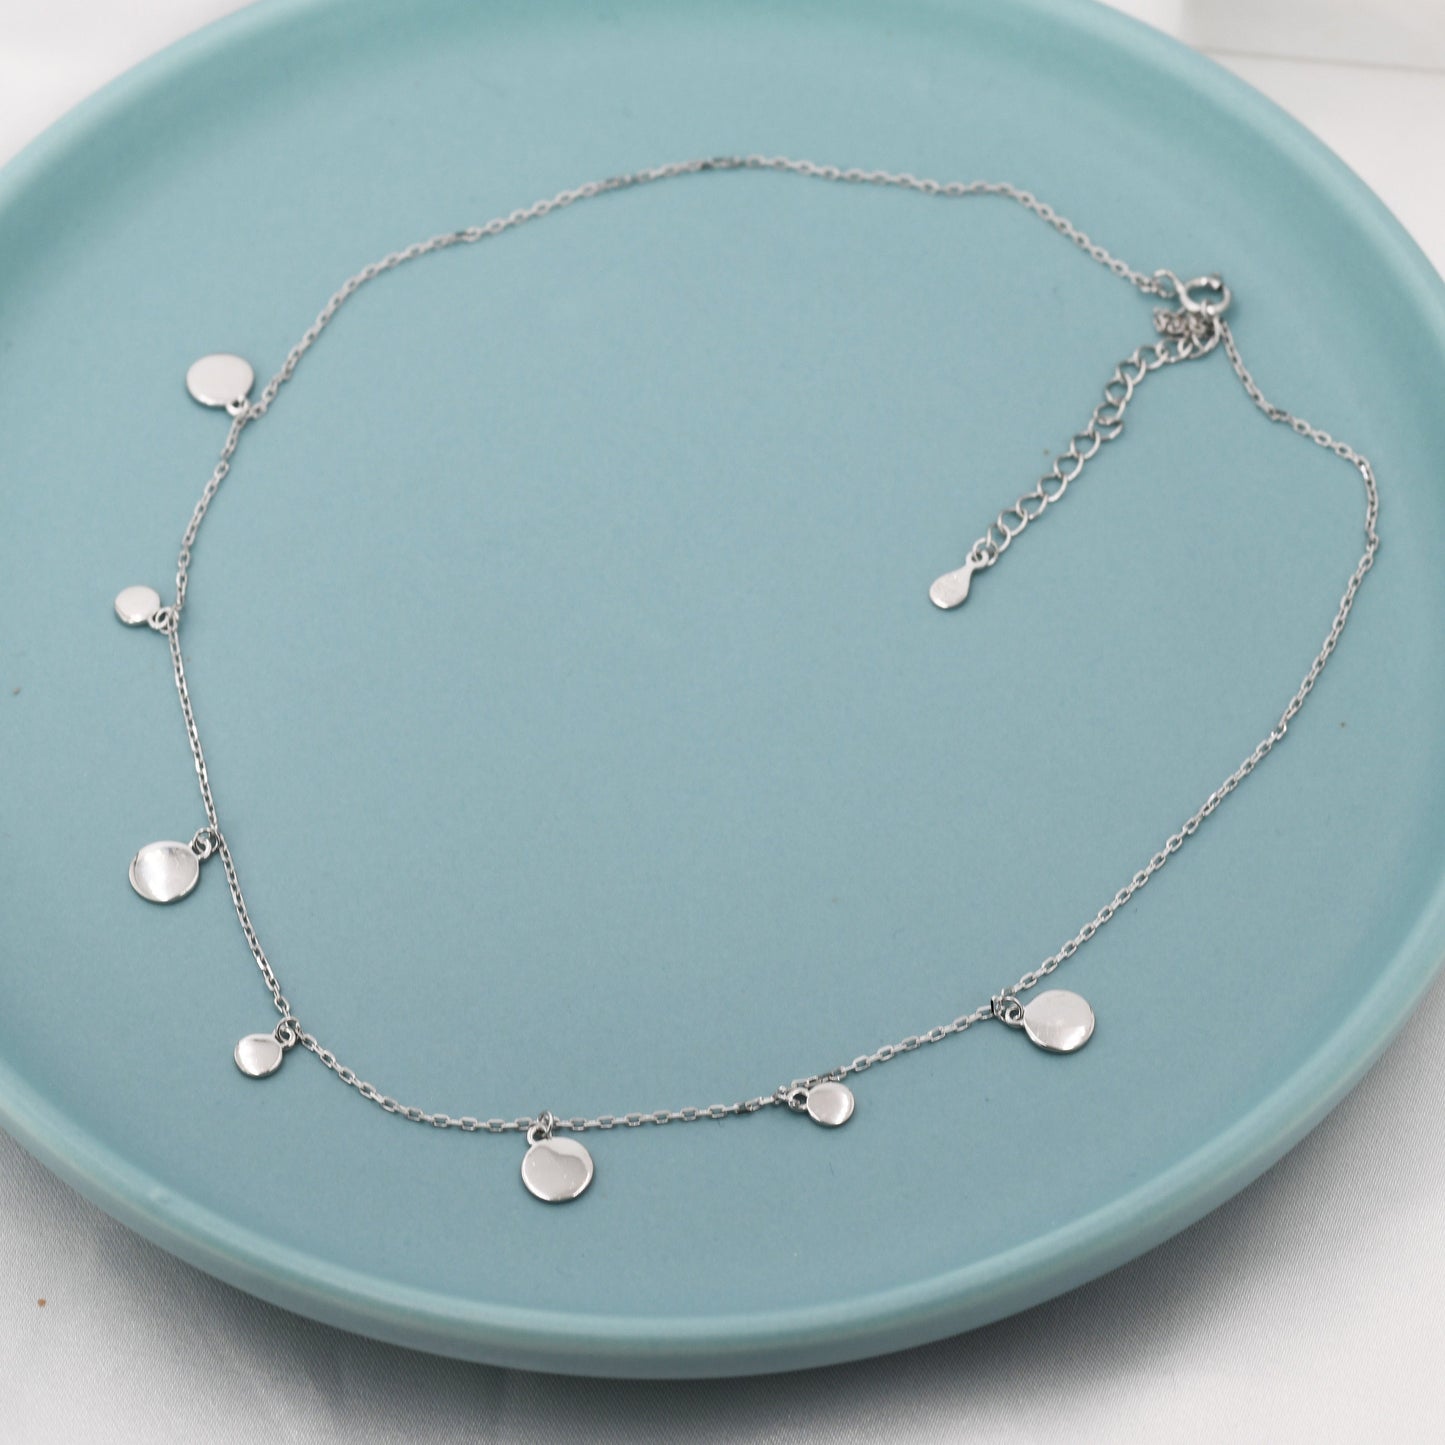 Dainty Disk Choker Necklace in Sterling Silver, Silver Disk Choker Necklace, Silver or Gold